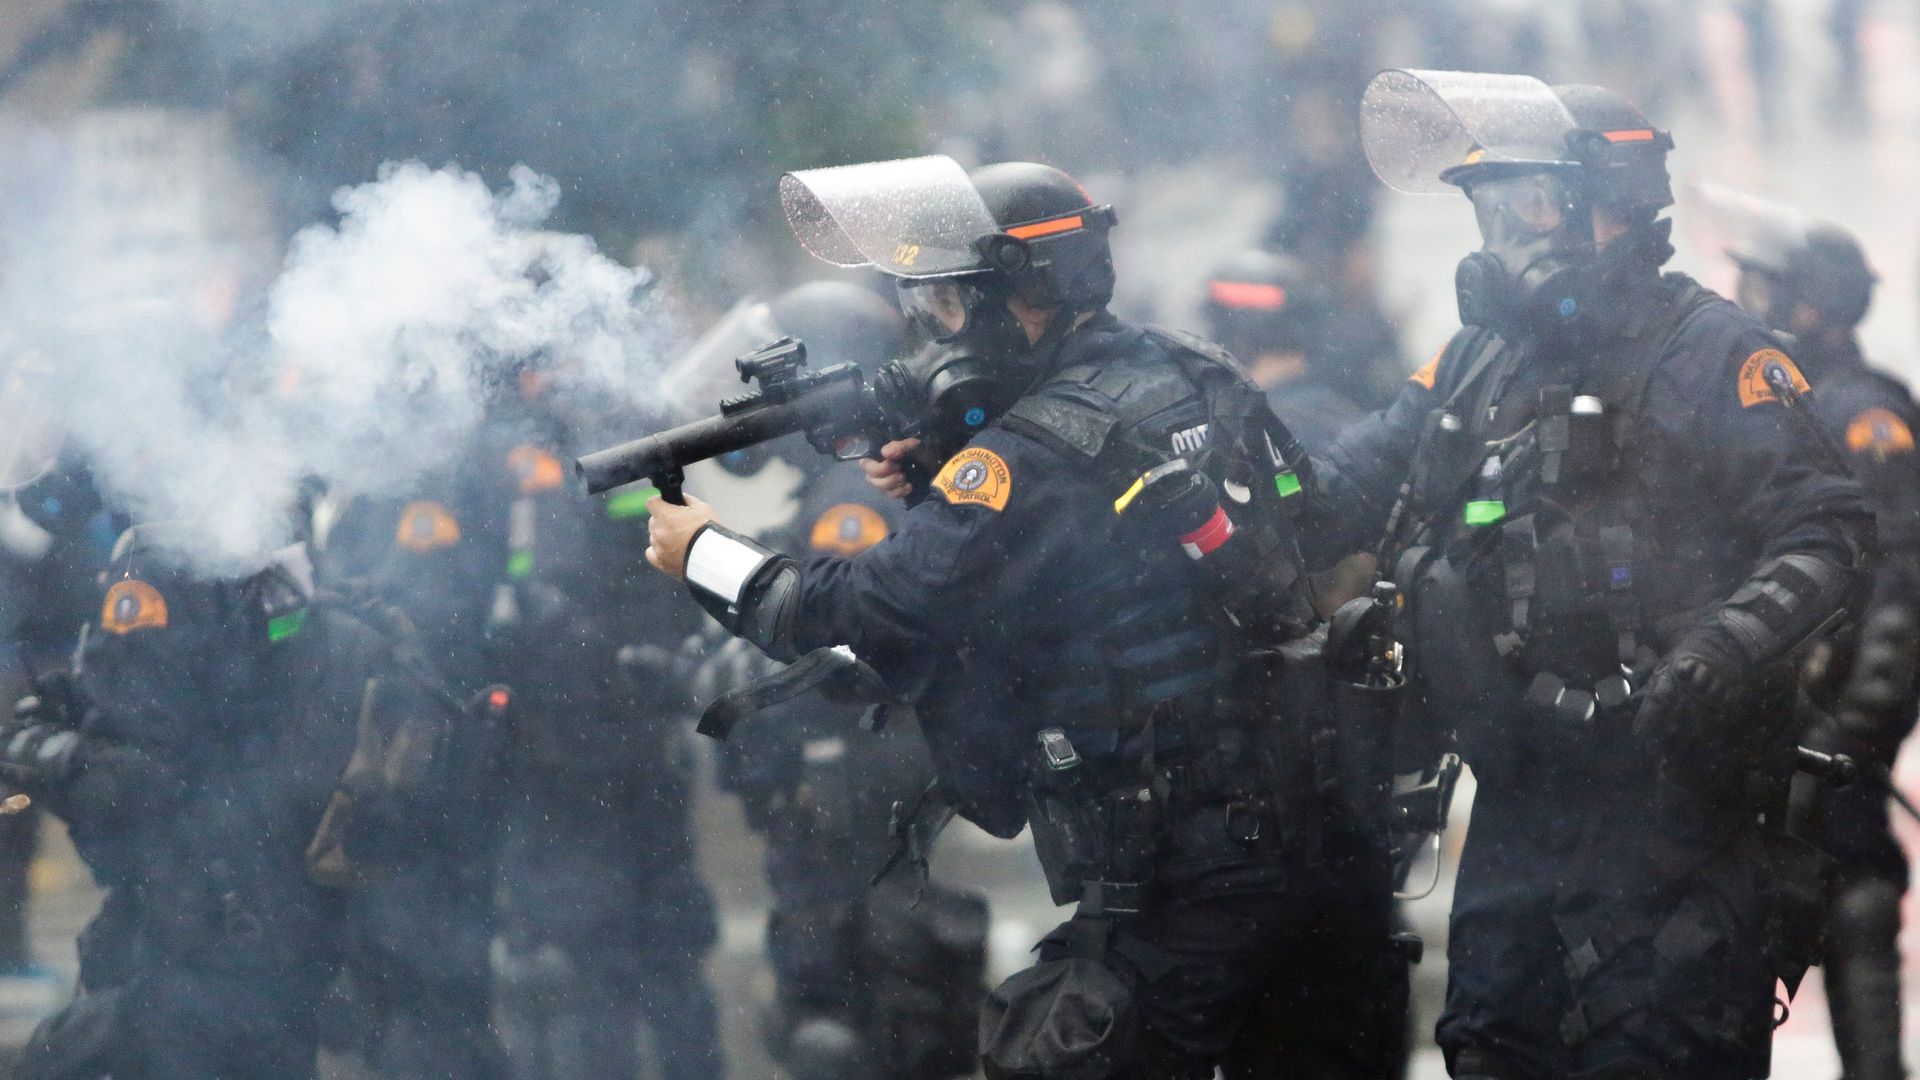 Washington State Police uses tear gas to disperse a crowd during a demonstration protesting the death of George Floyd